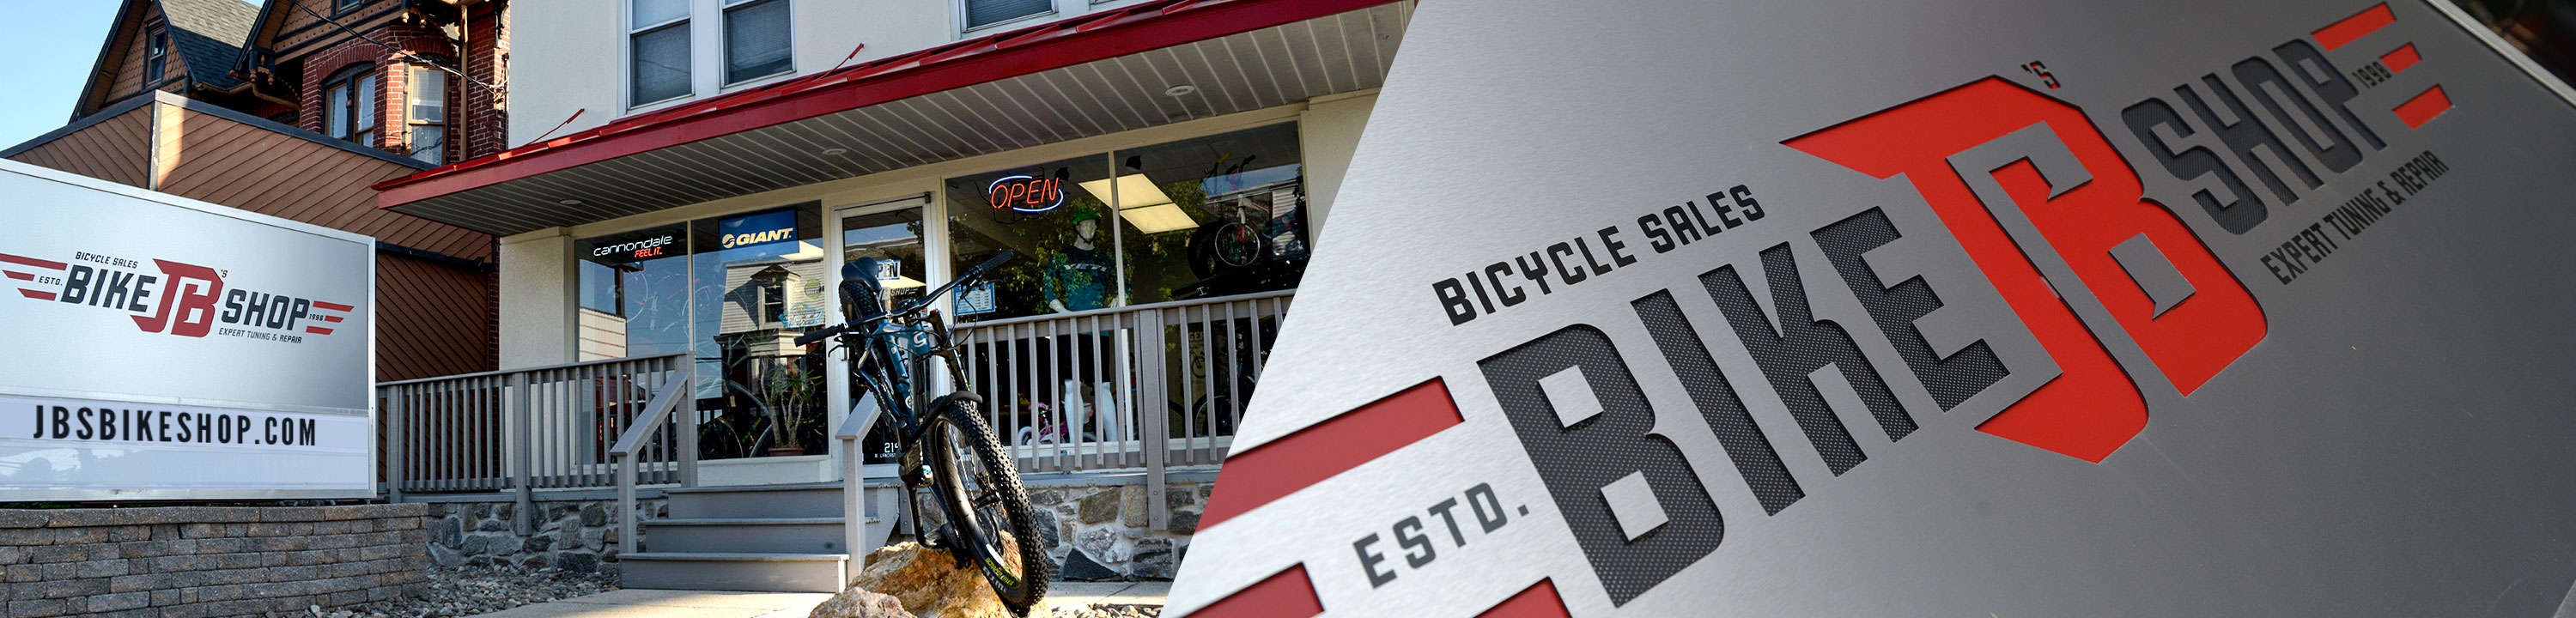 Bike Shop and Retail Signage